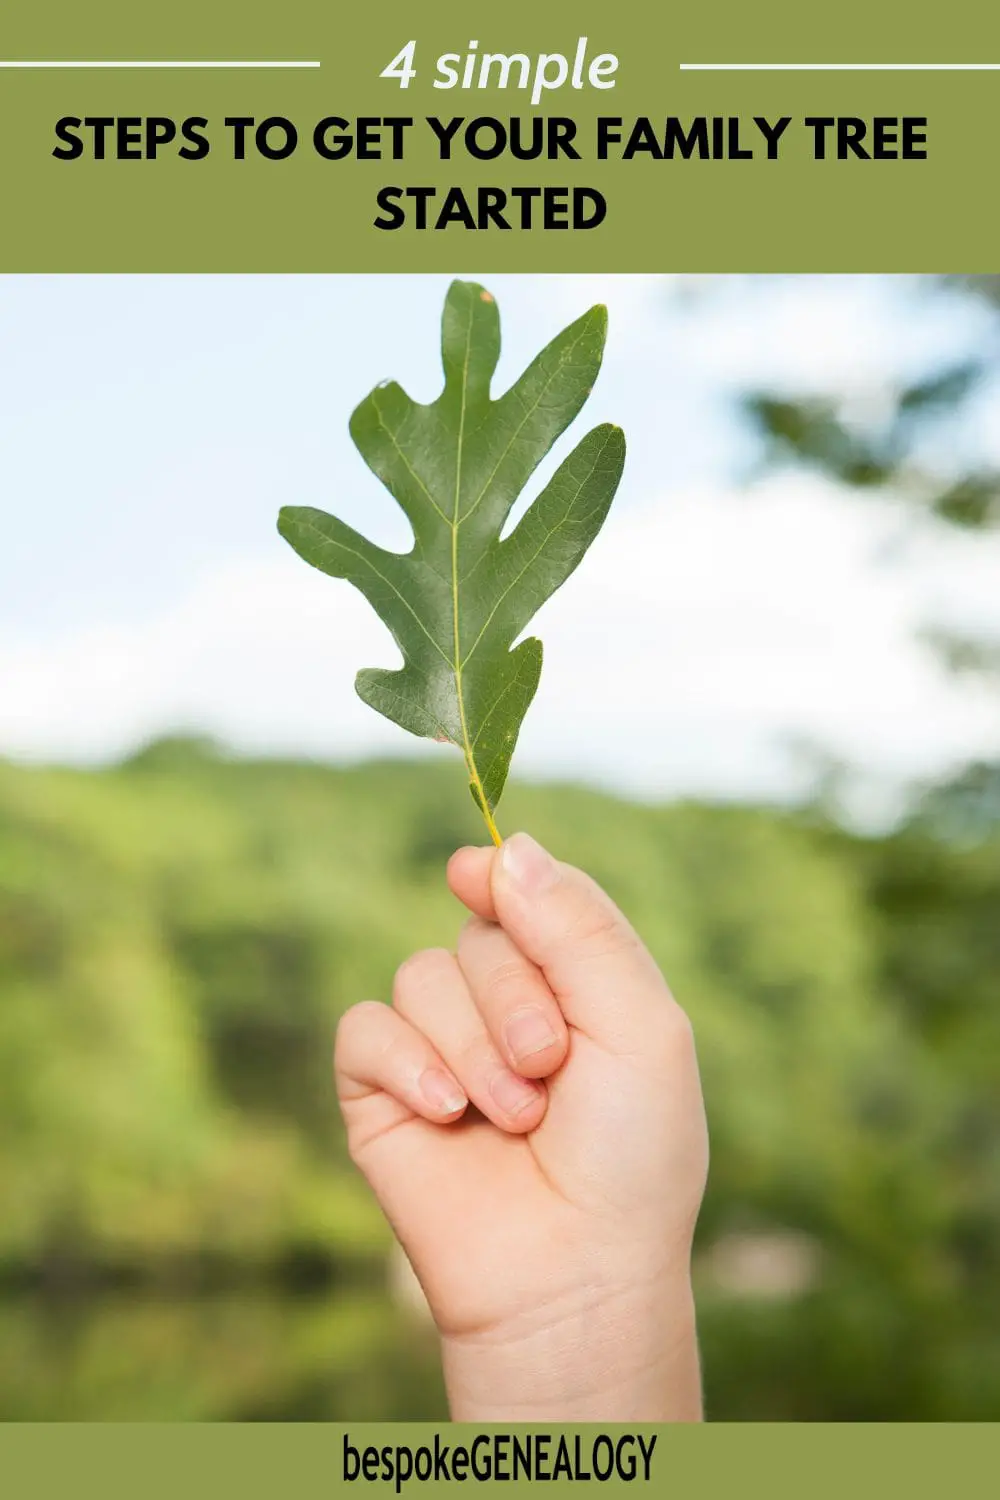 4 Simple steps to get your family tree started. Photo of a child's hand holding a leaf in a forest.